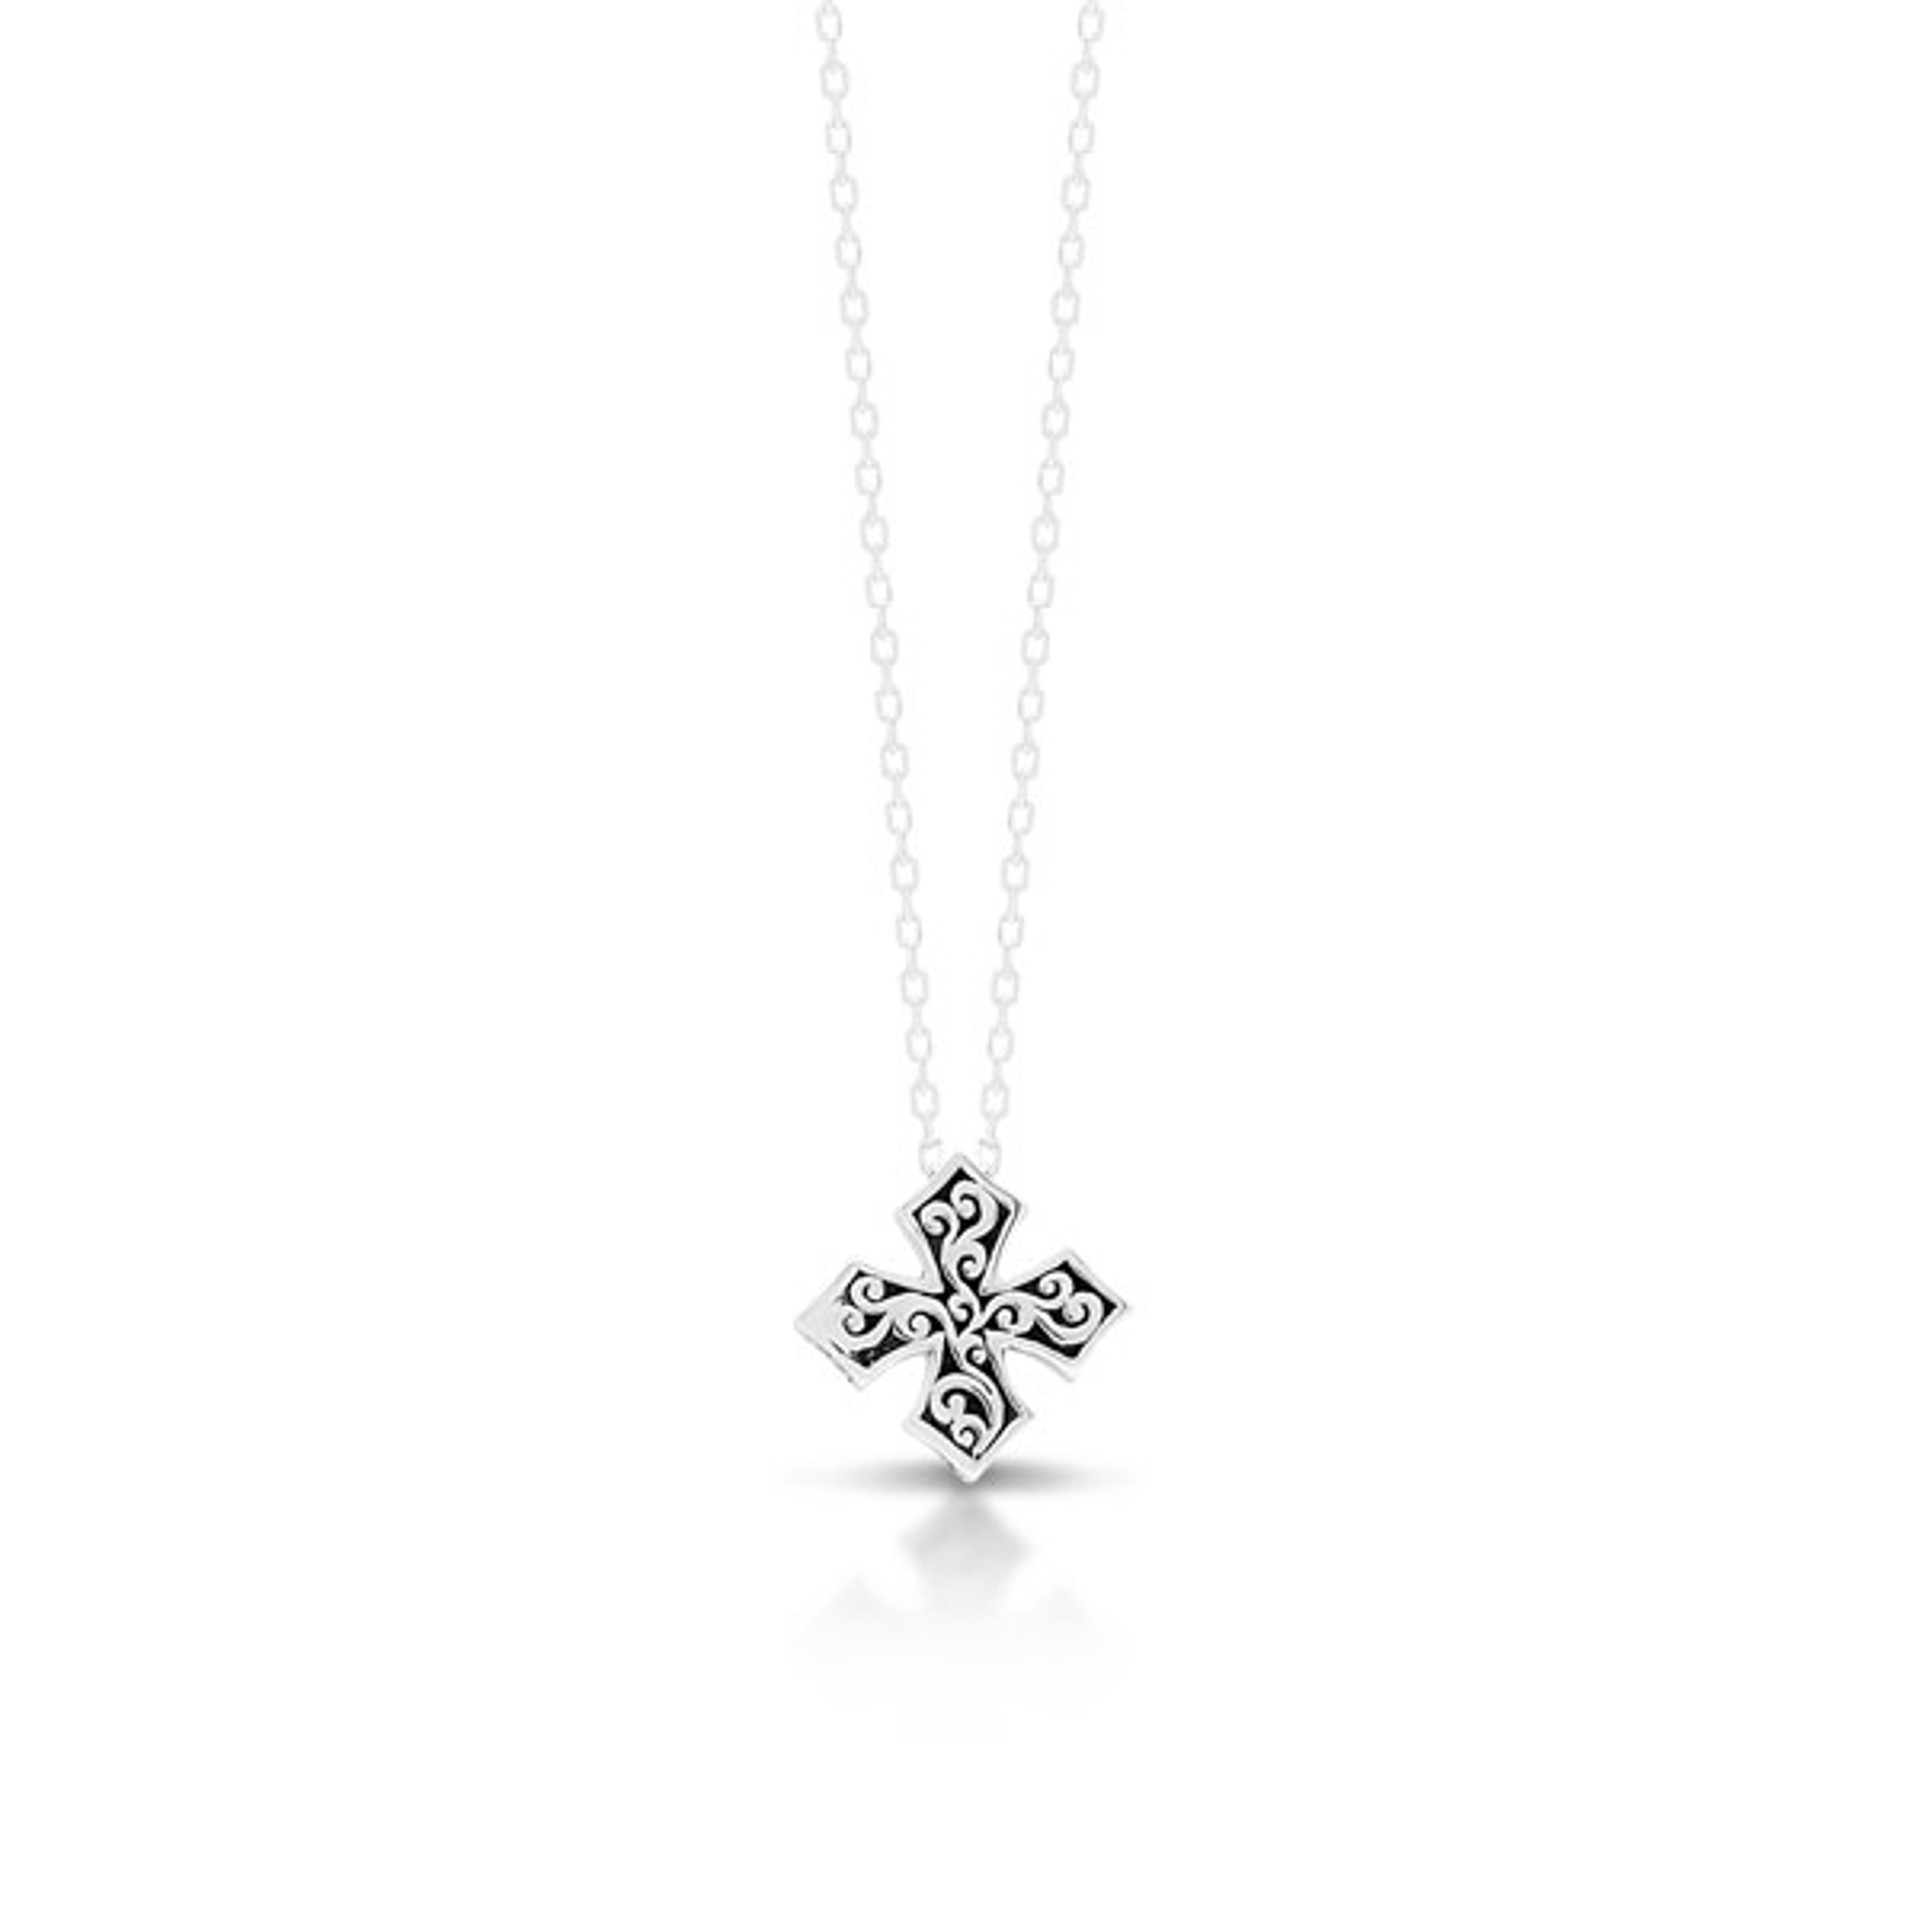 Sterling Silver Cross Necklace with Signature LH Scroll Pattern by Lois Hill